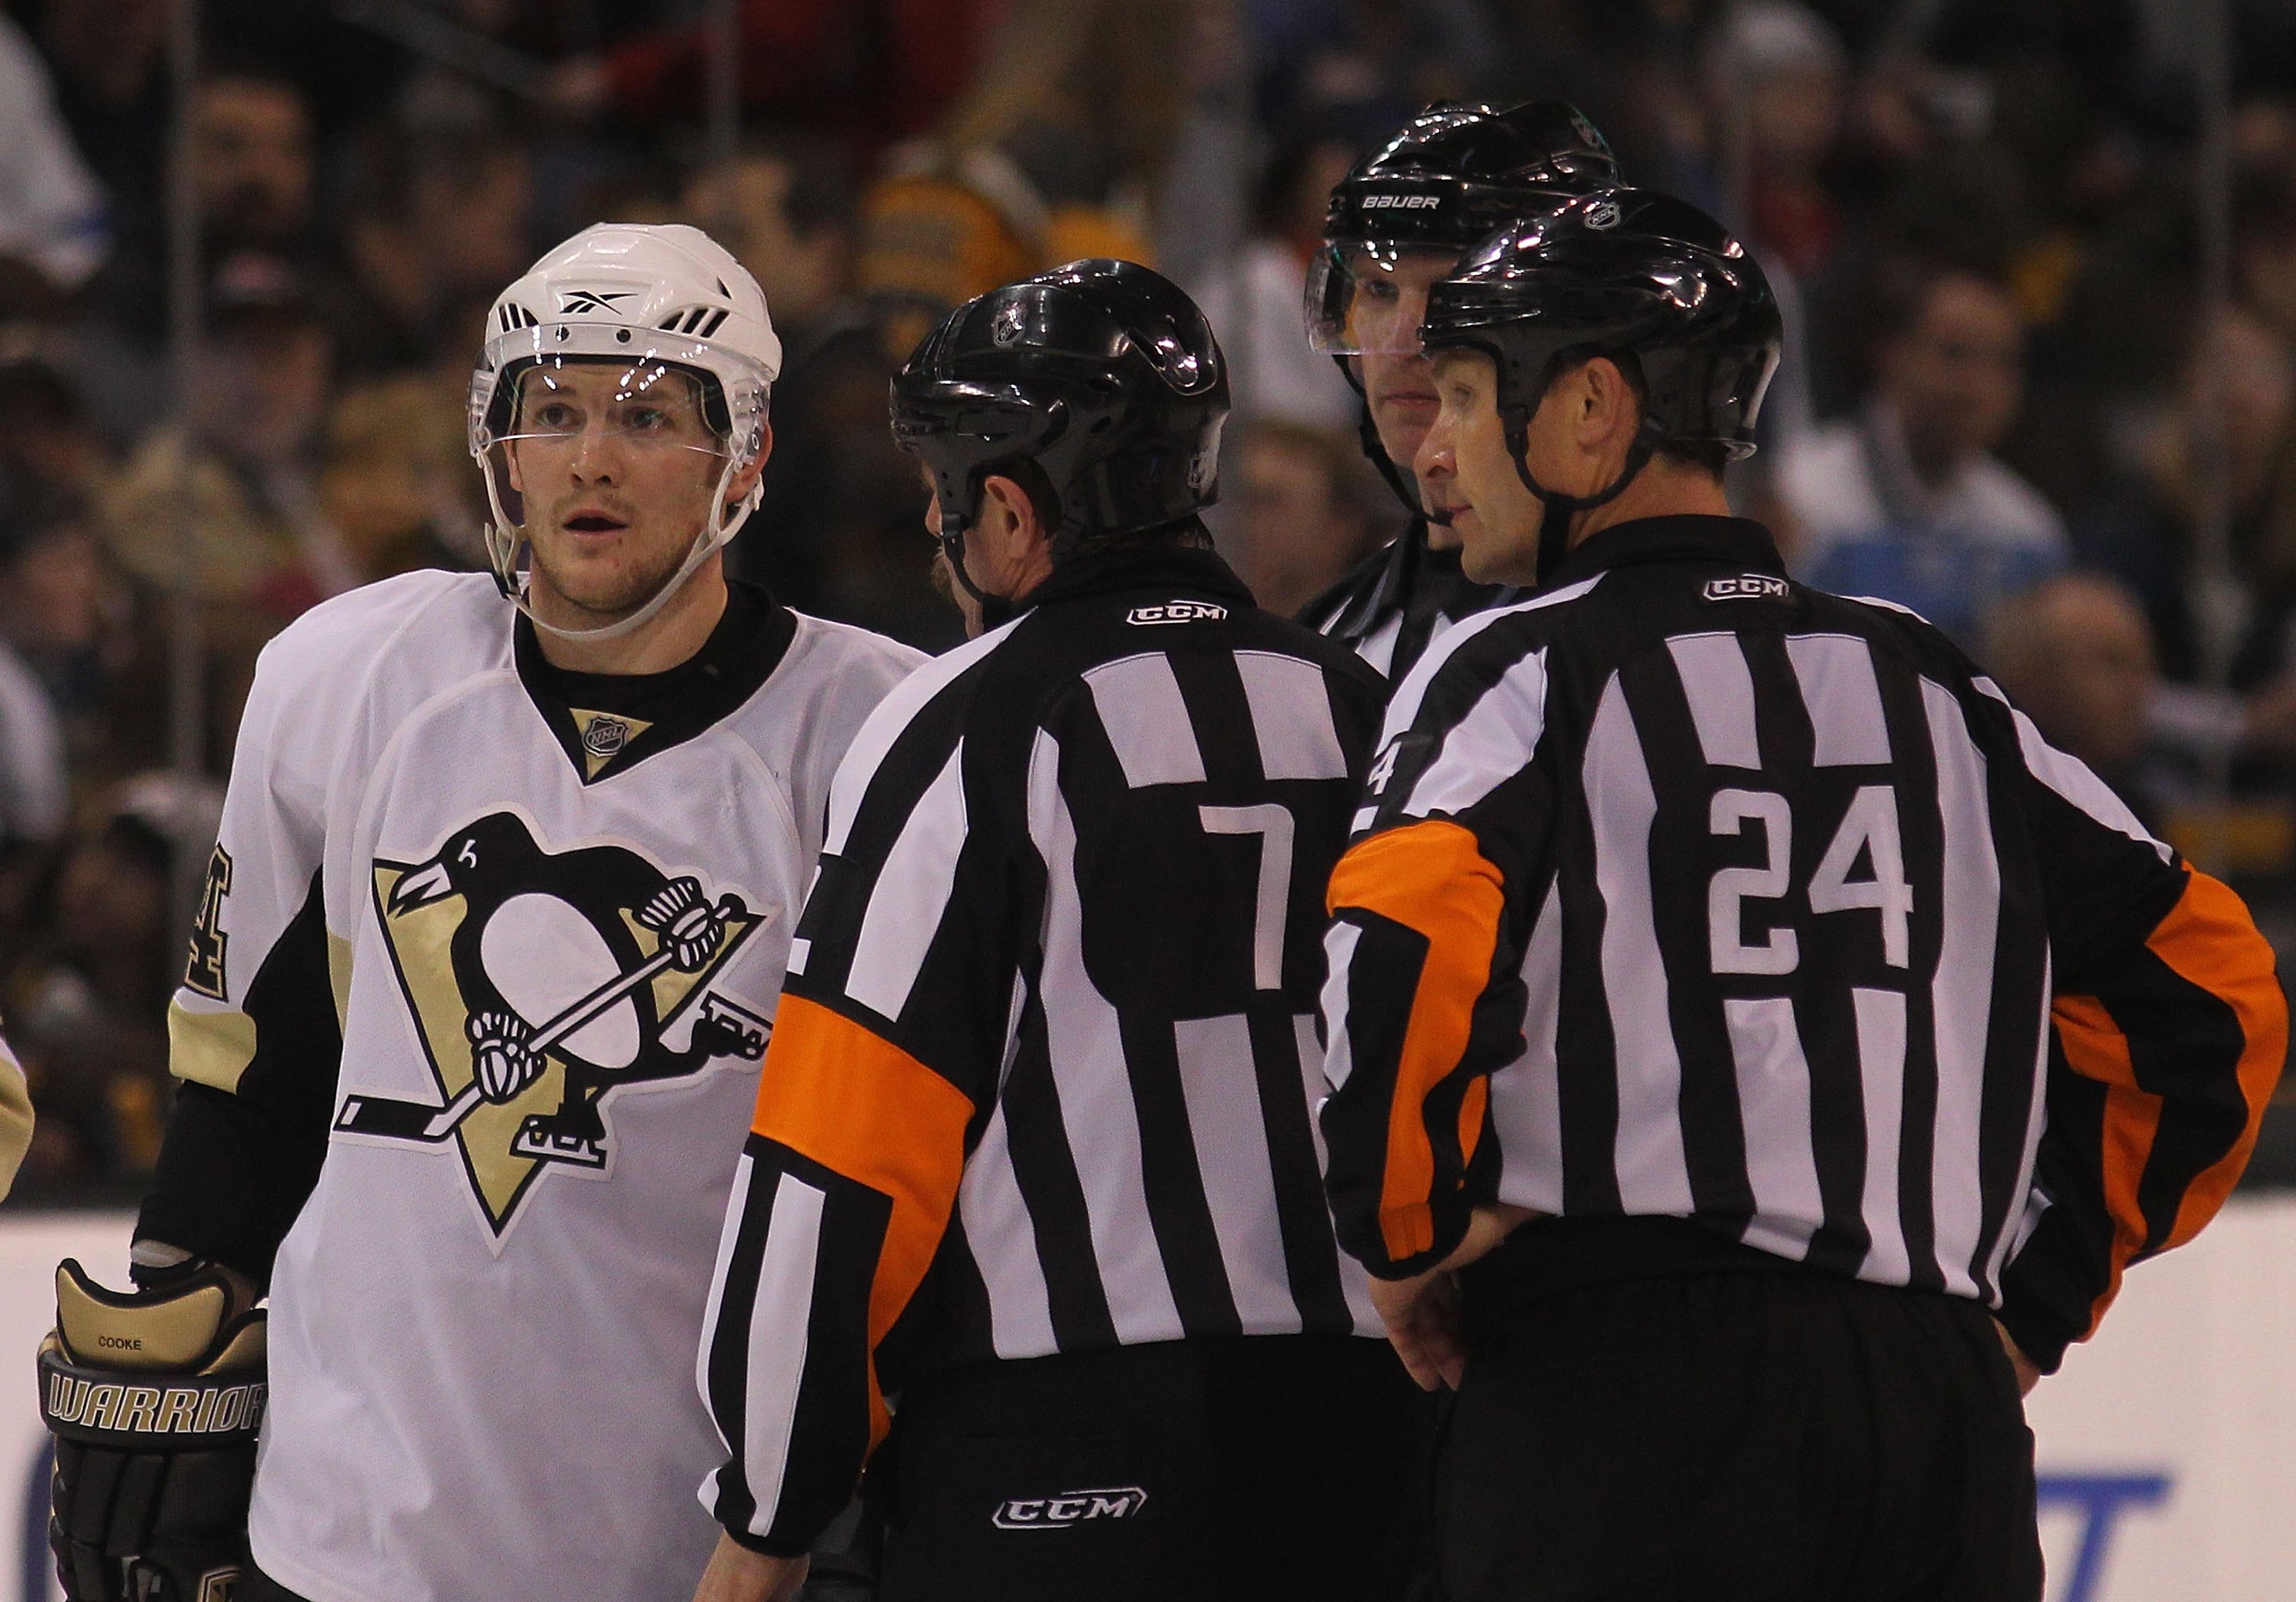 Pittsburgh Penguins' Matt Cooke and His Five Most Infamous Moments